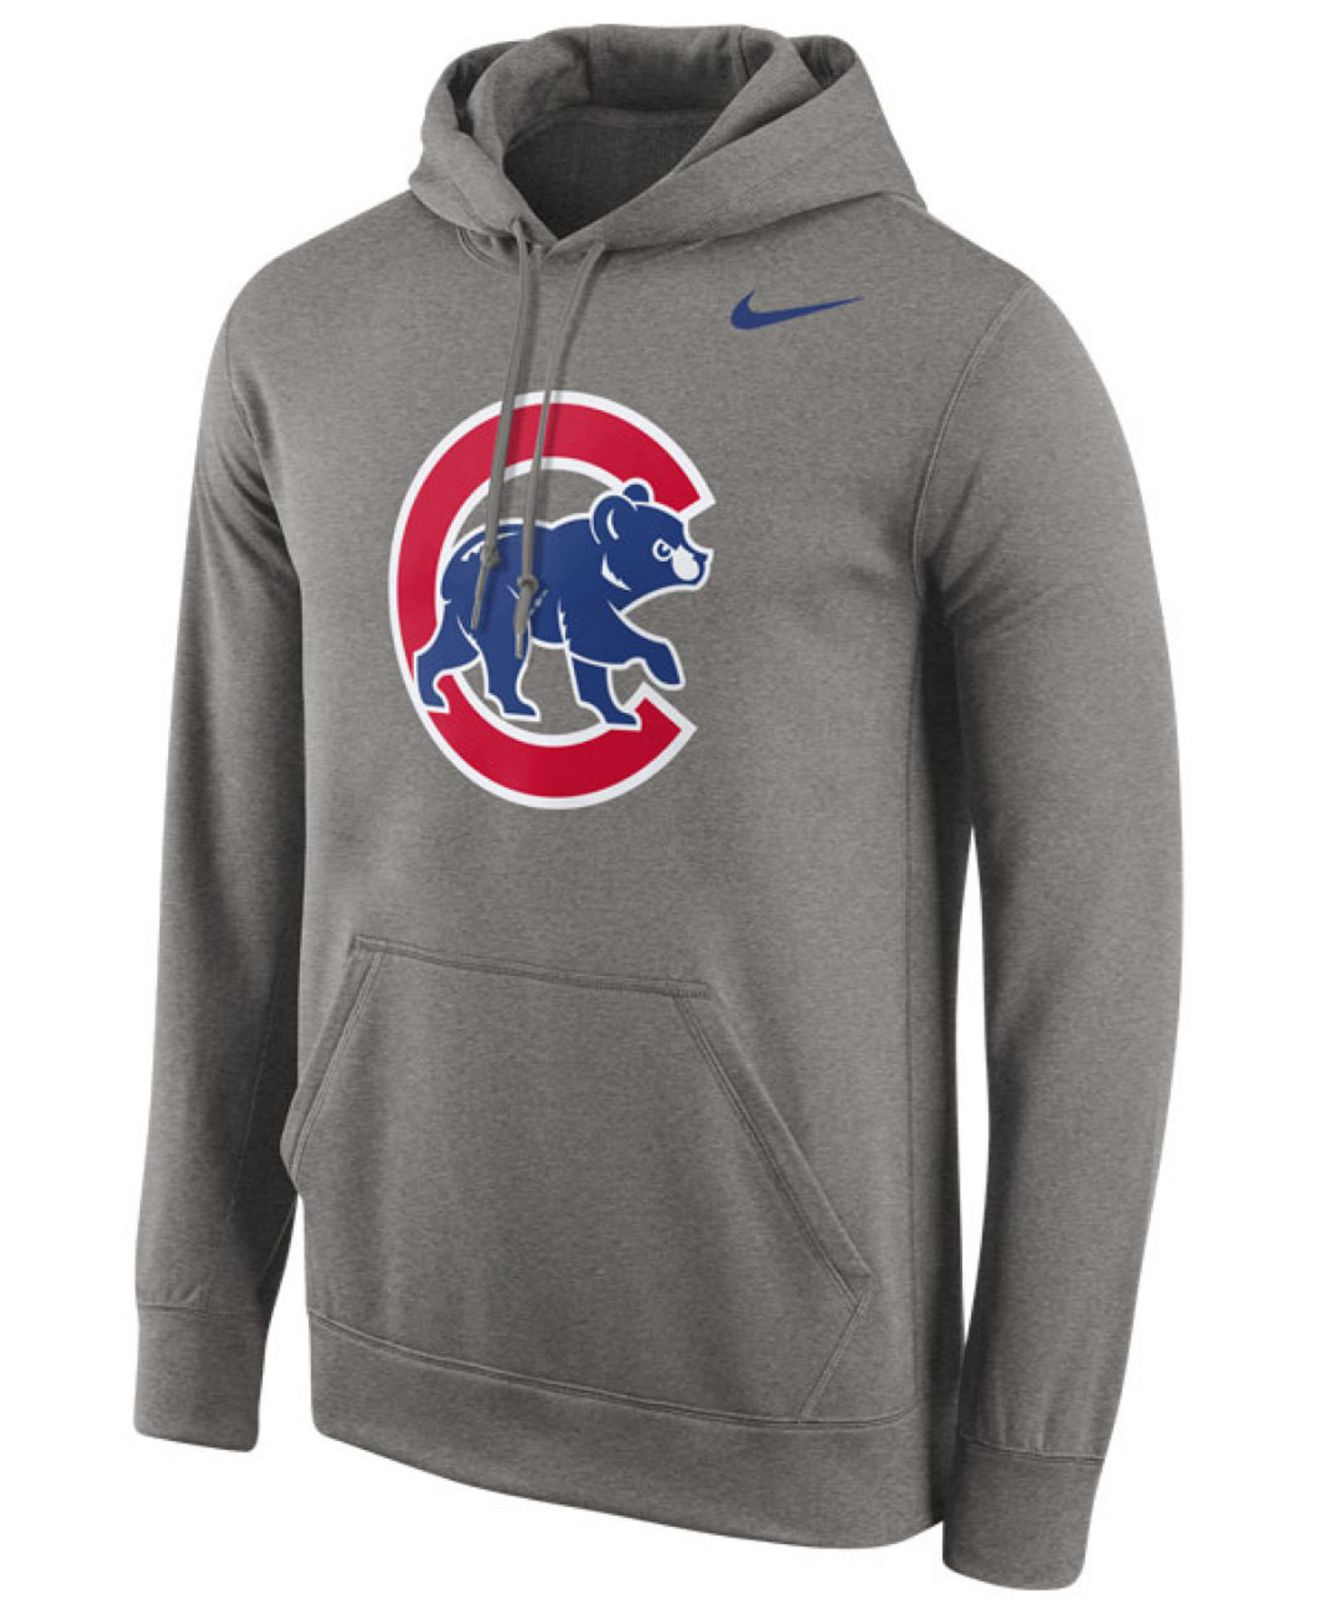 Lyst - Nike Men's Chicago Cubs Performance Hoodie in Gray for Men